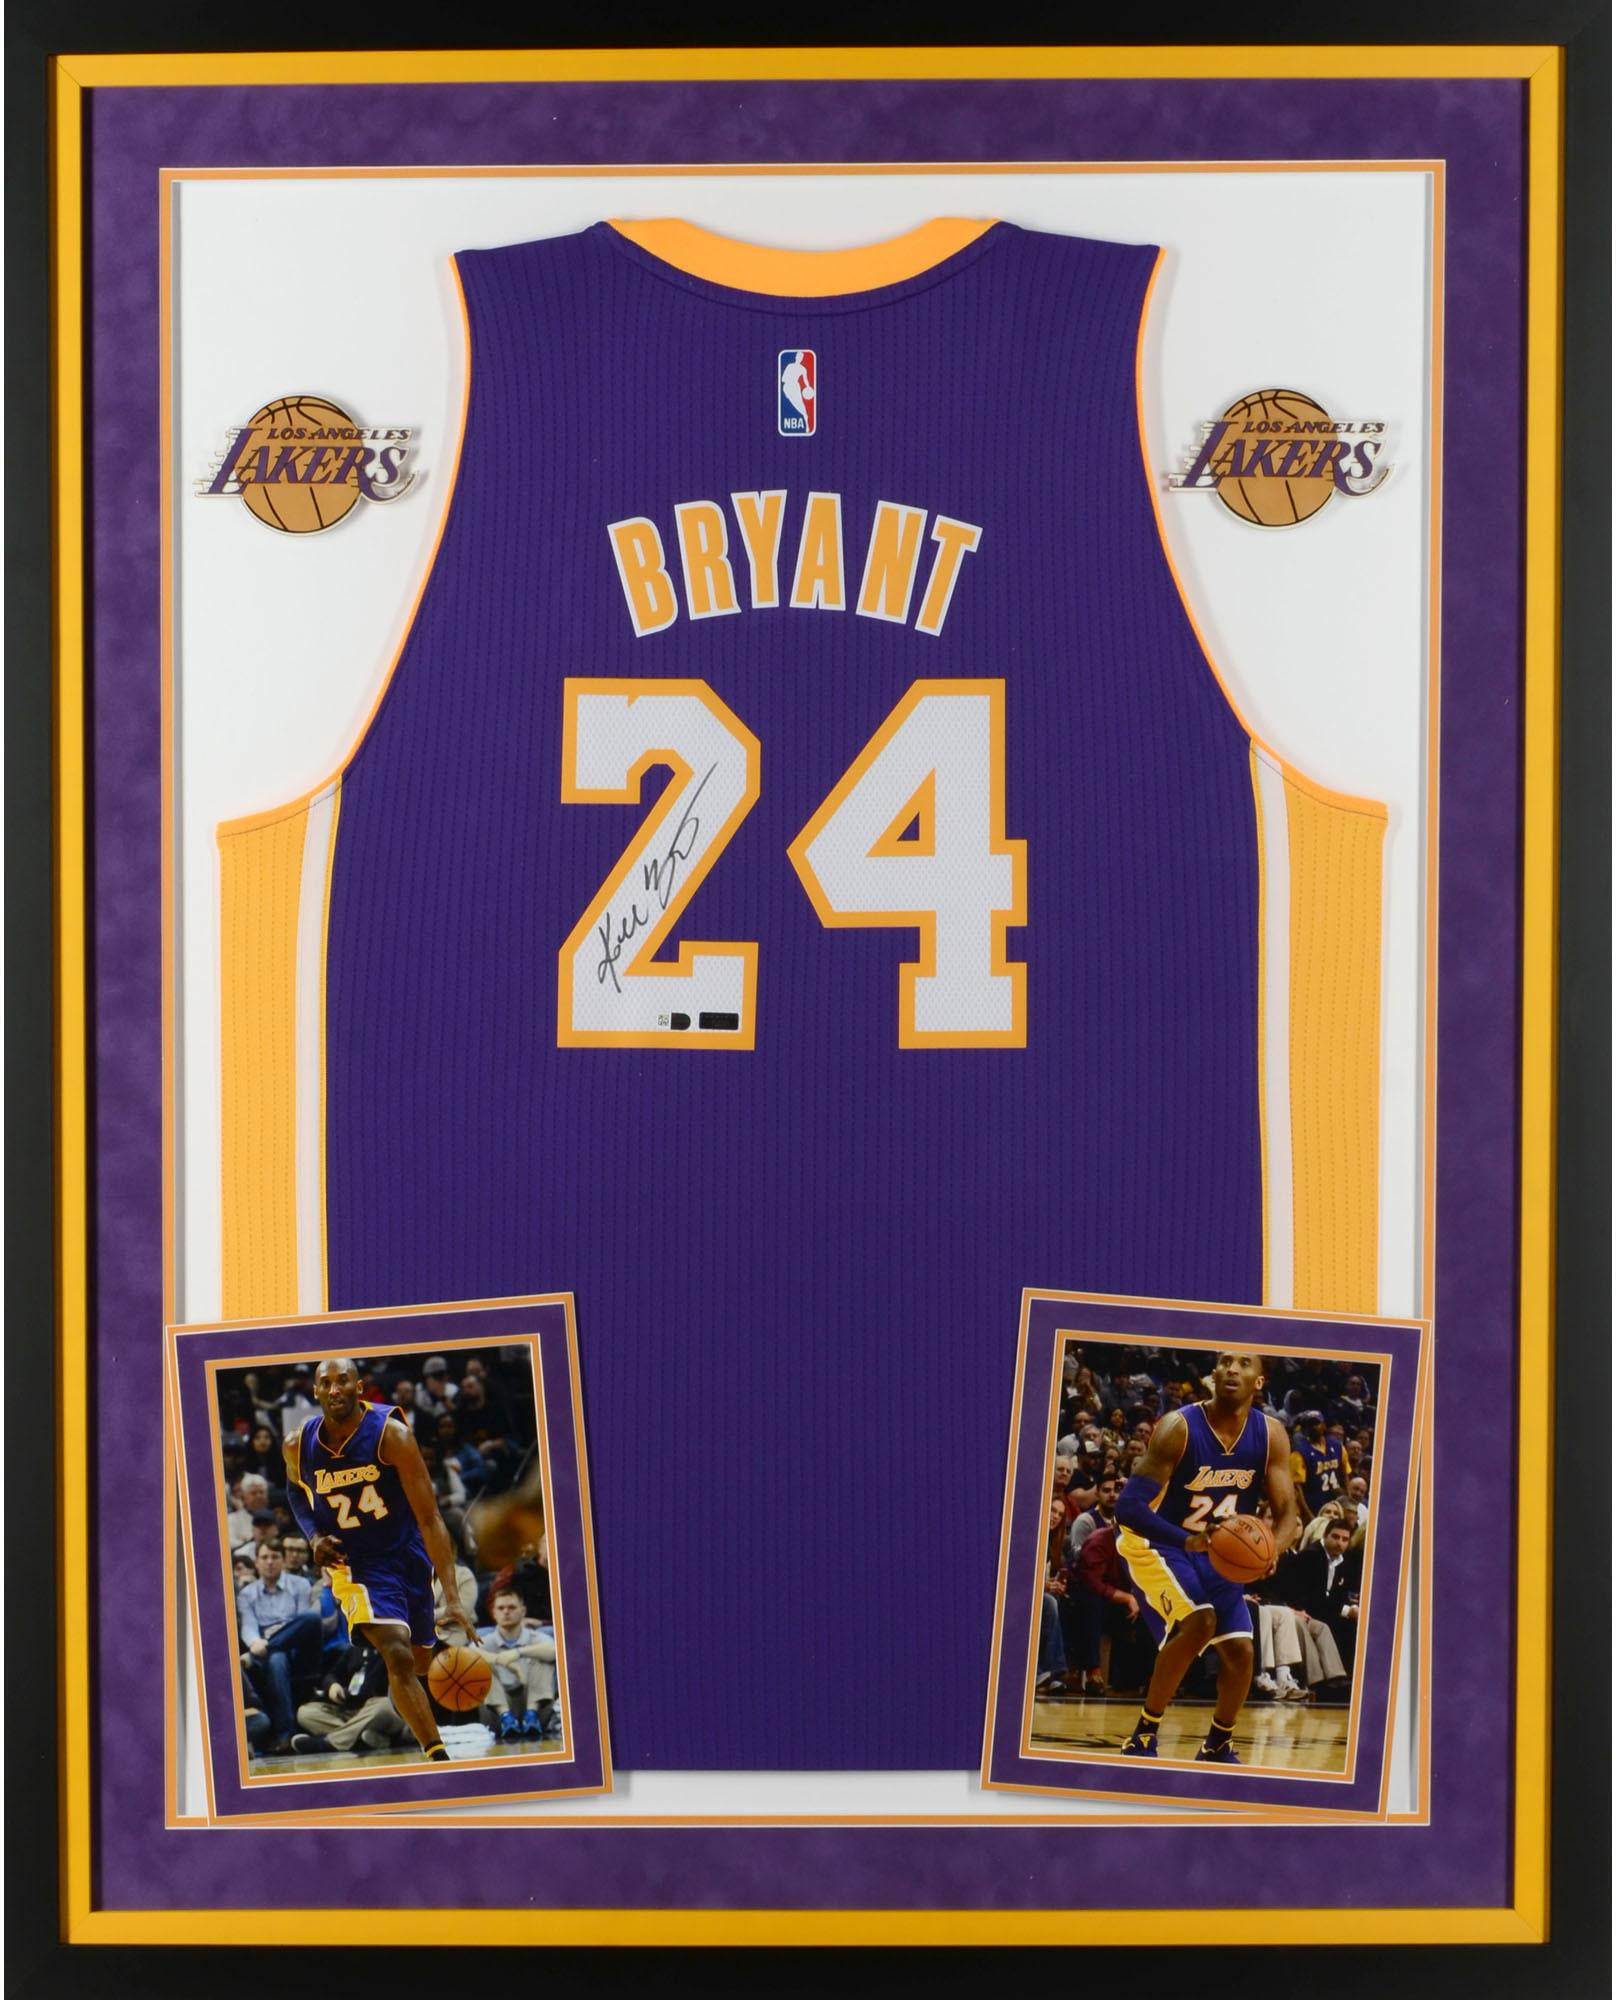 Kobe Bryant Los Angeles Lakers Deluxe Framed Autographed Purple Adidas Swingman Jersey - Panini Authentic - Fanatics Authentic Certified